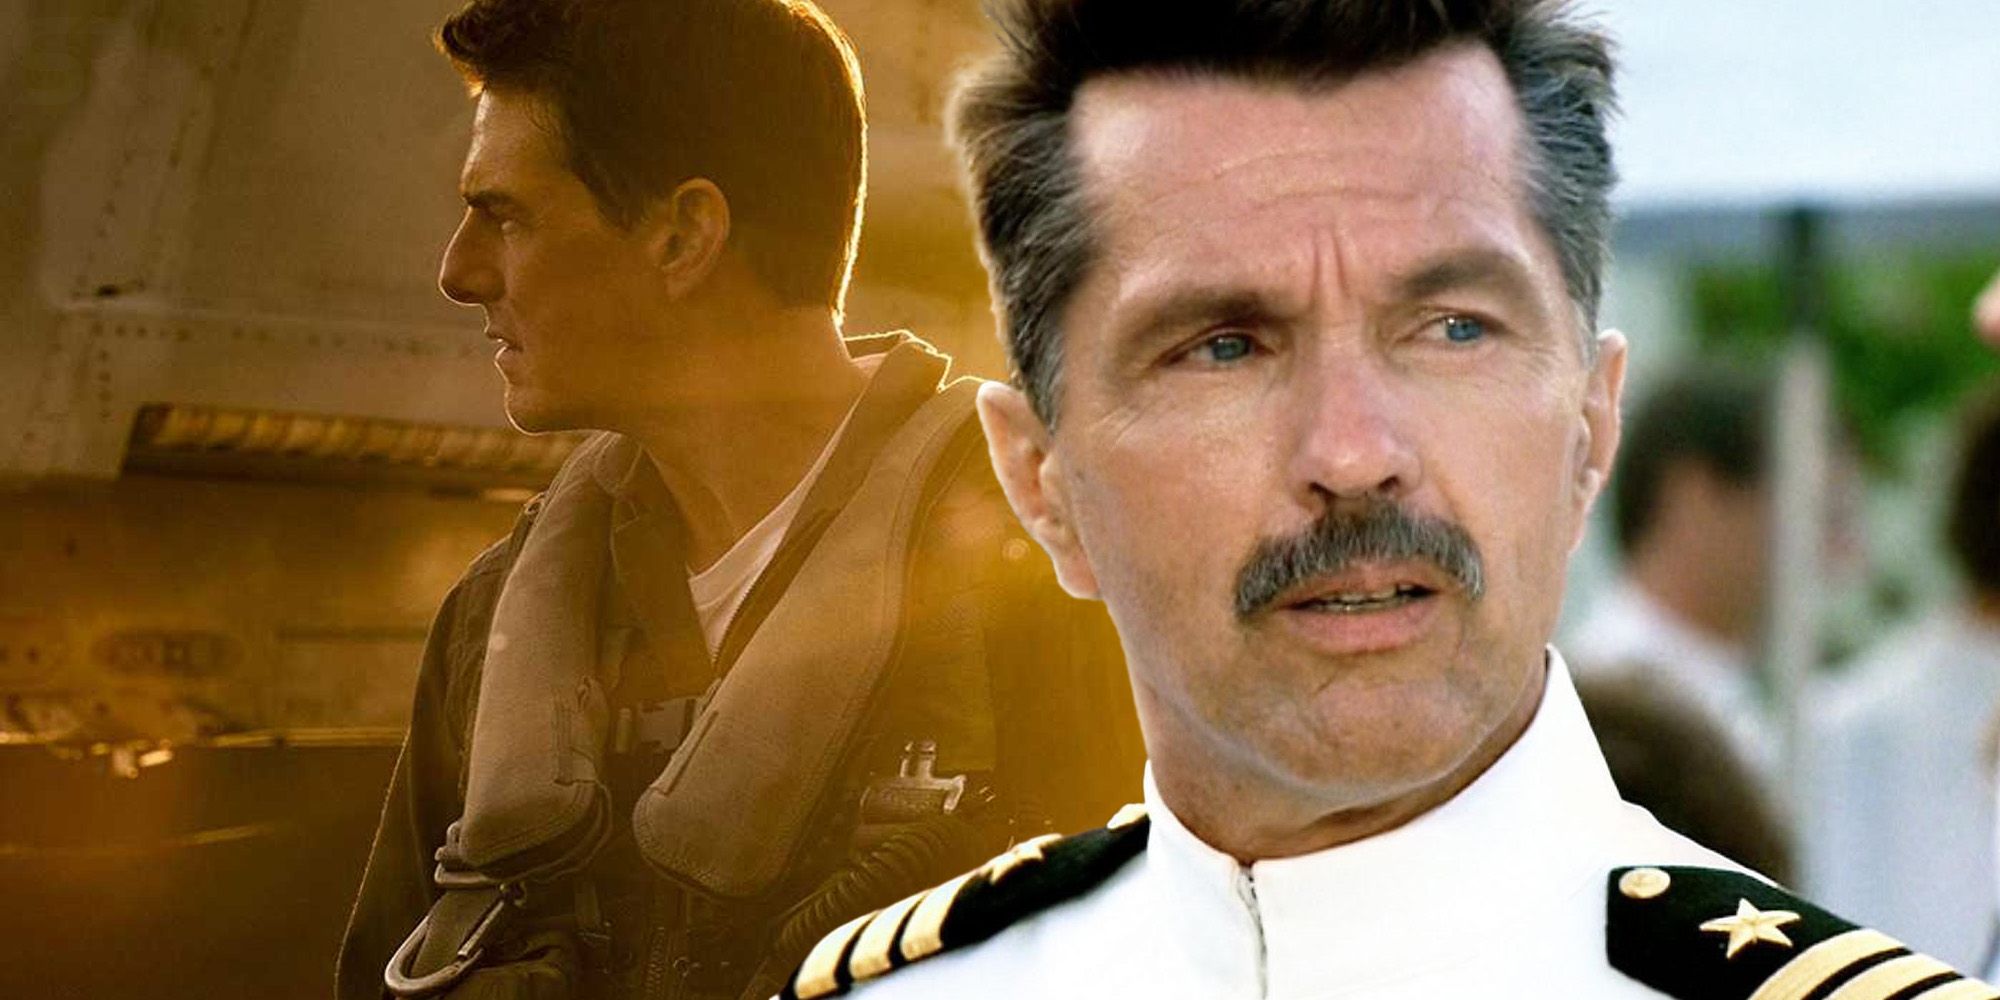 Top Gun collage with Tom Cruise as Maverick and Tom Skerritt as Viper